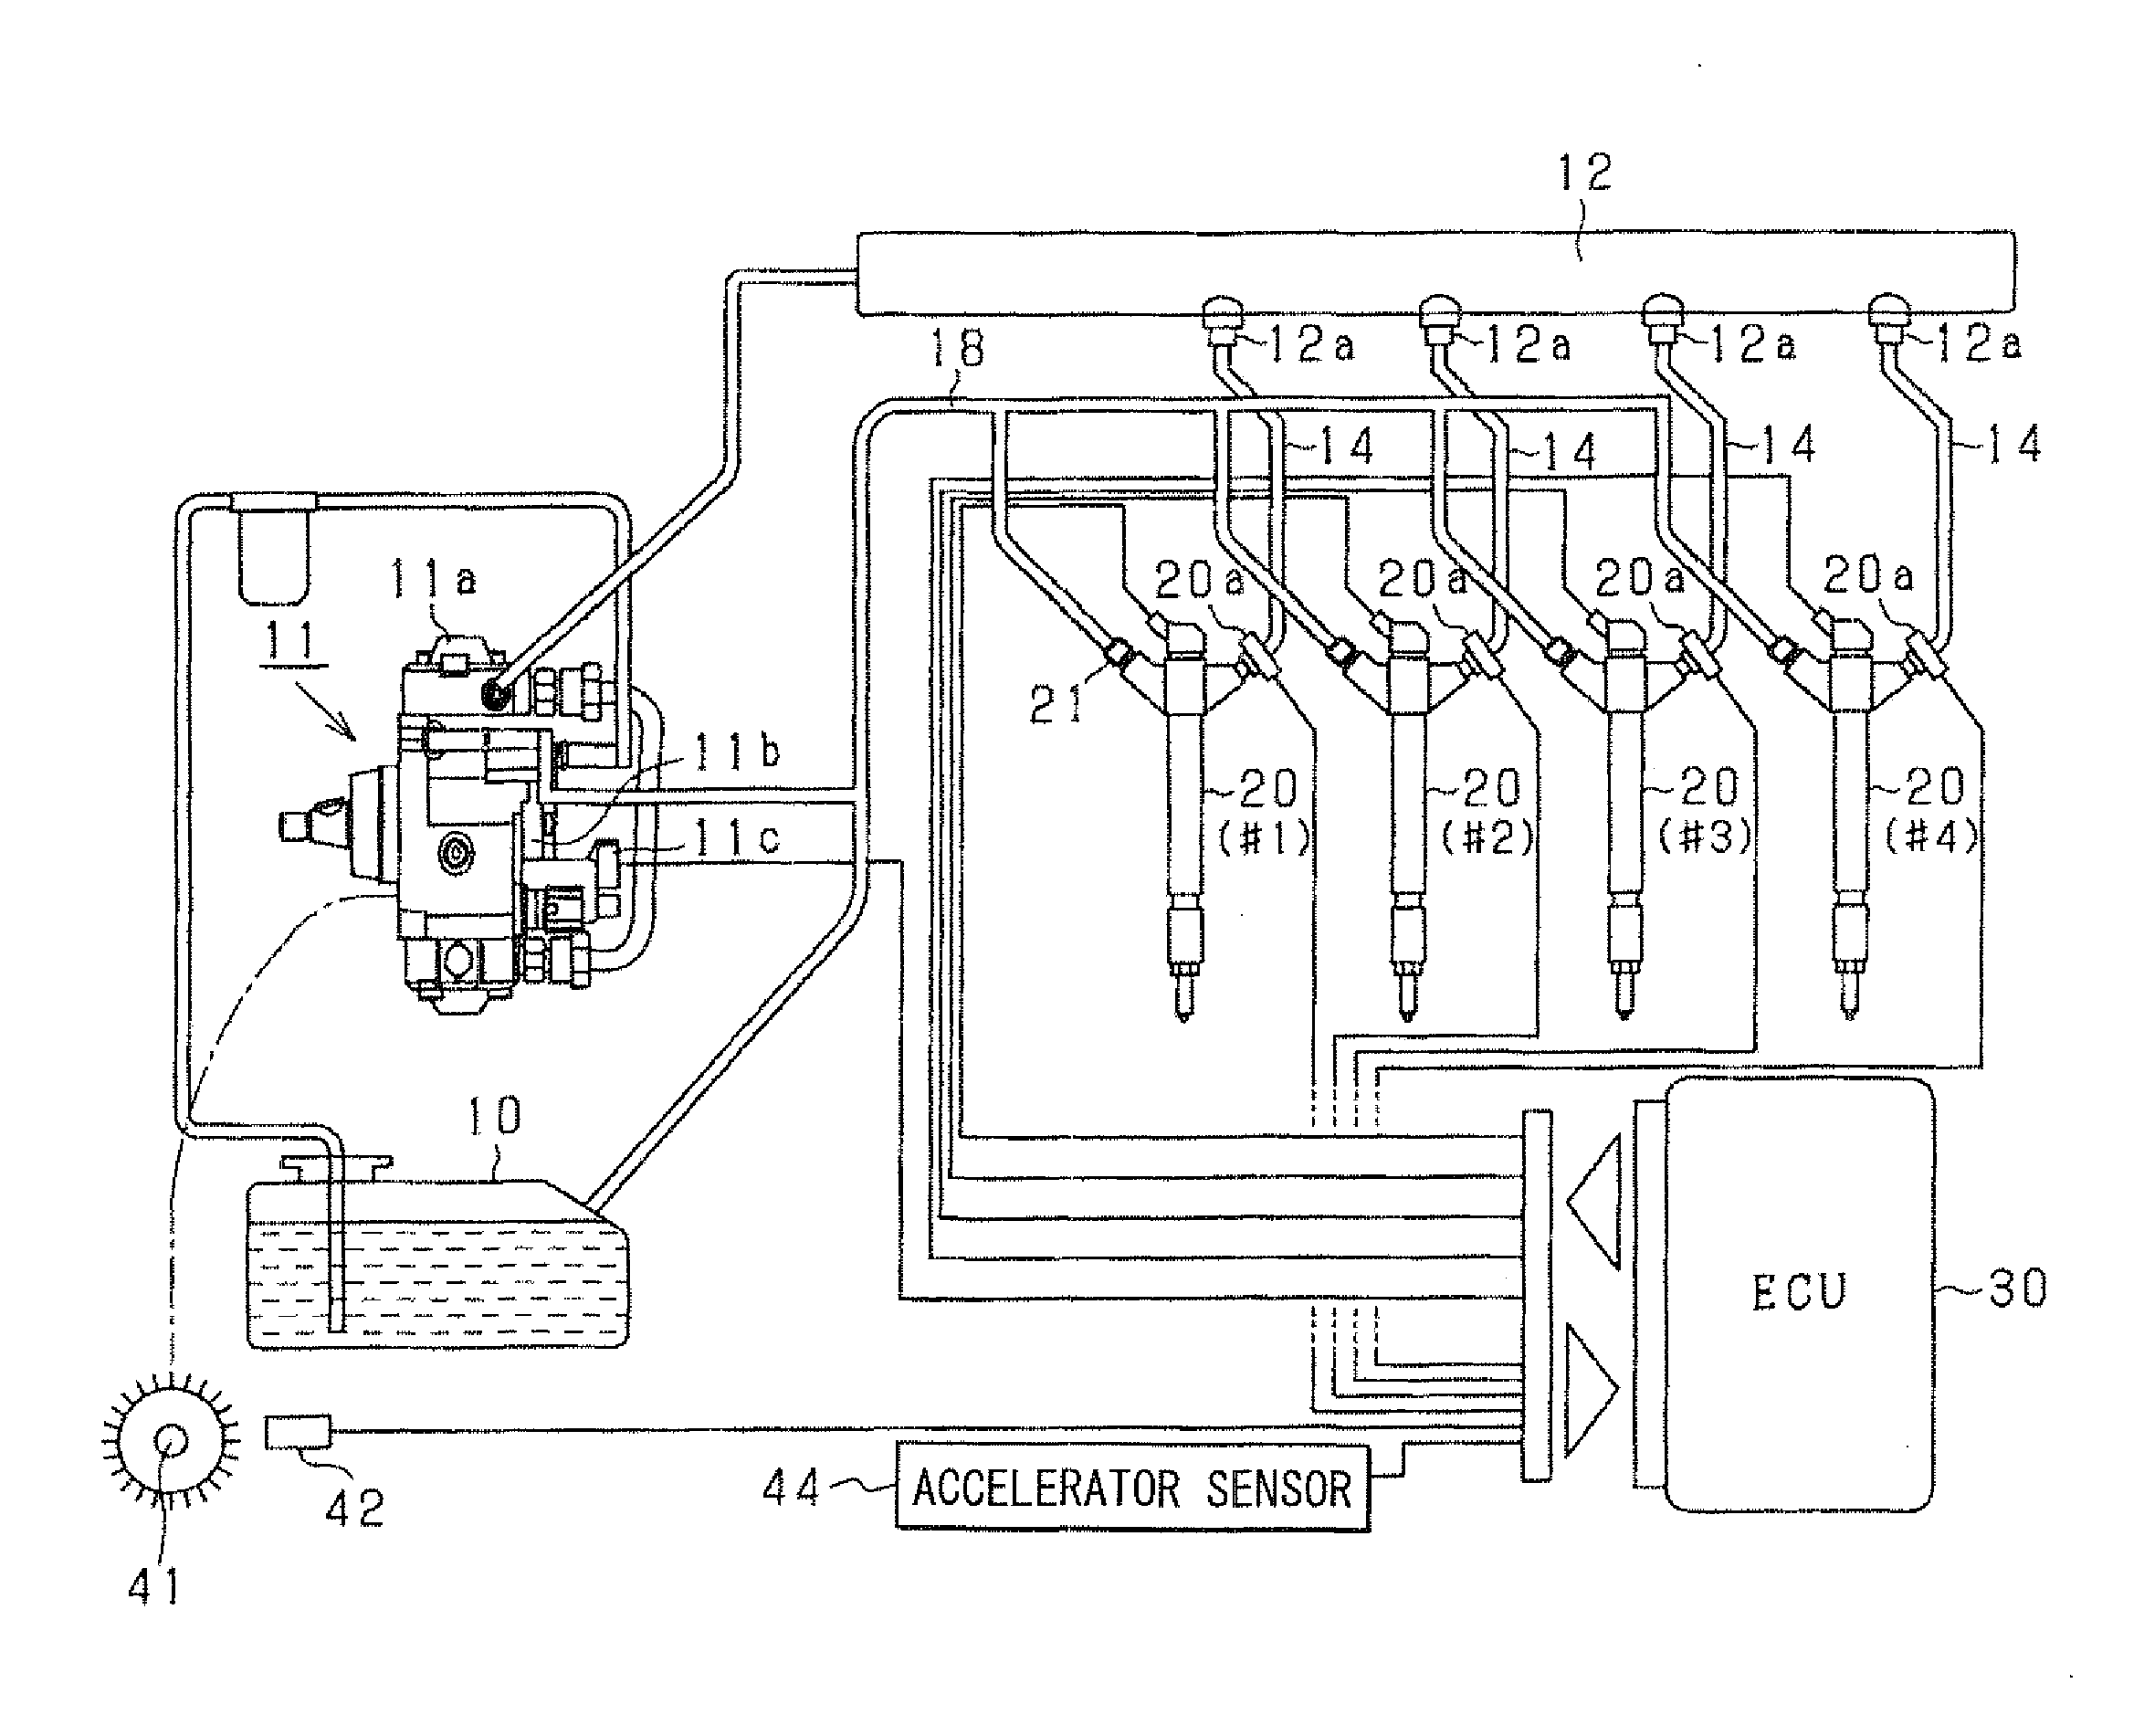 Fuel injection detecting device